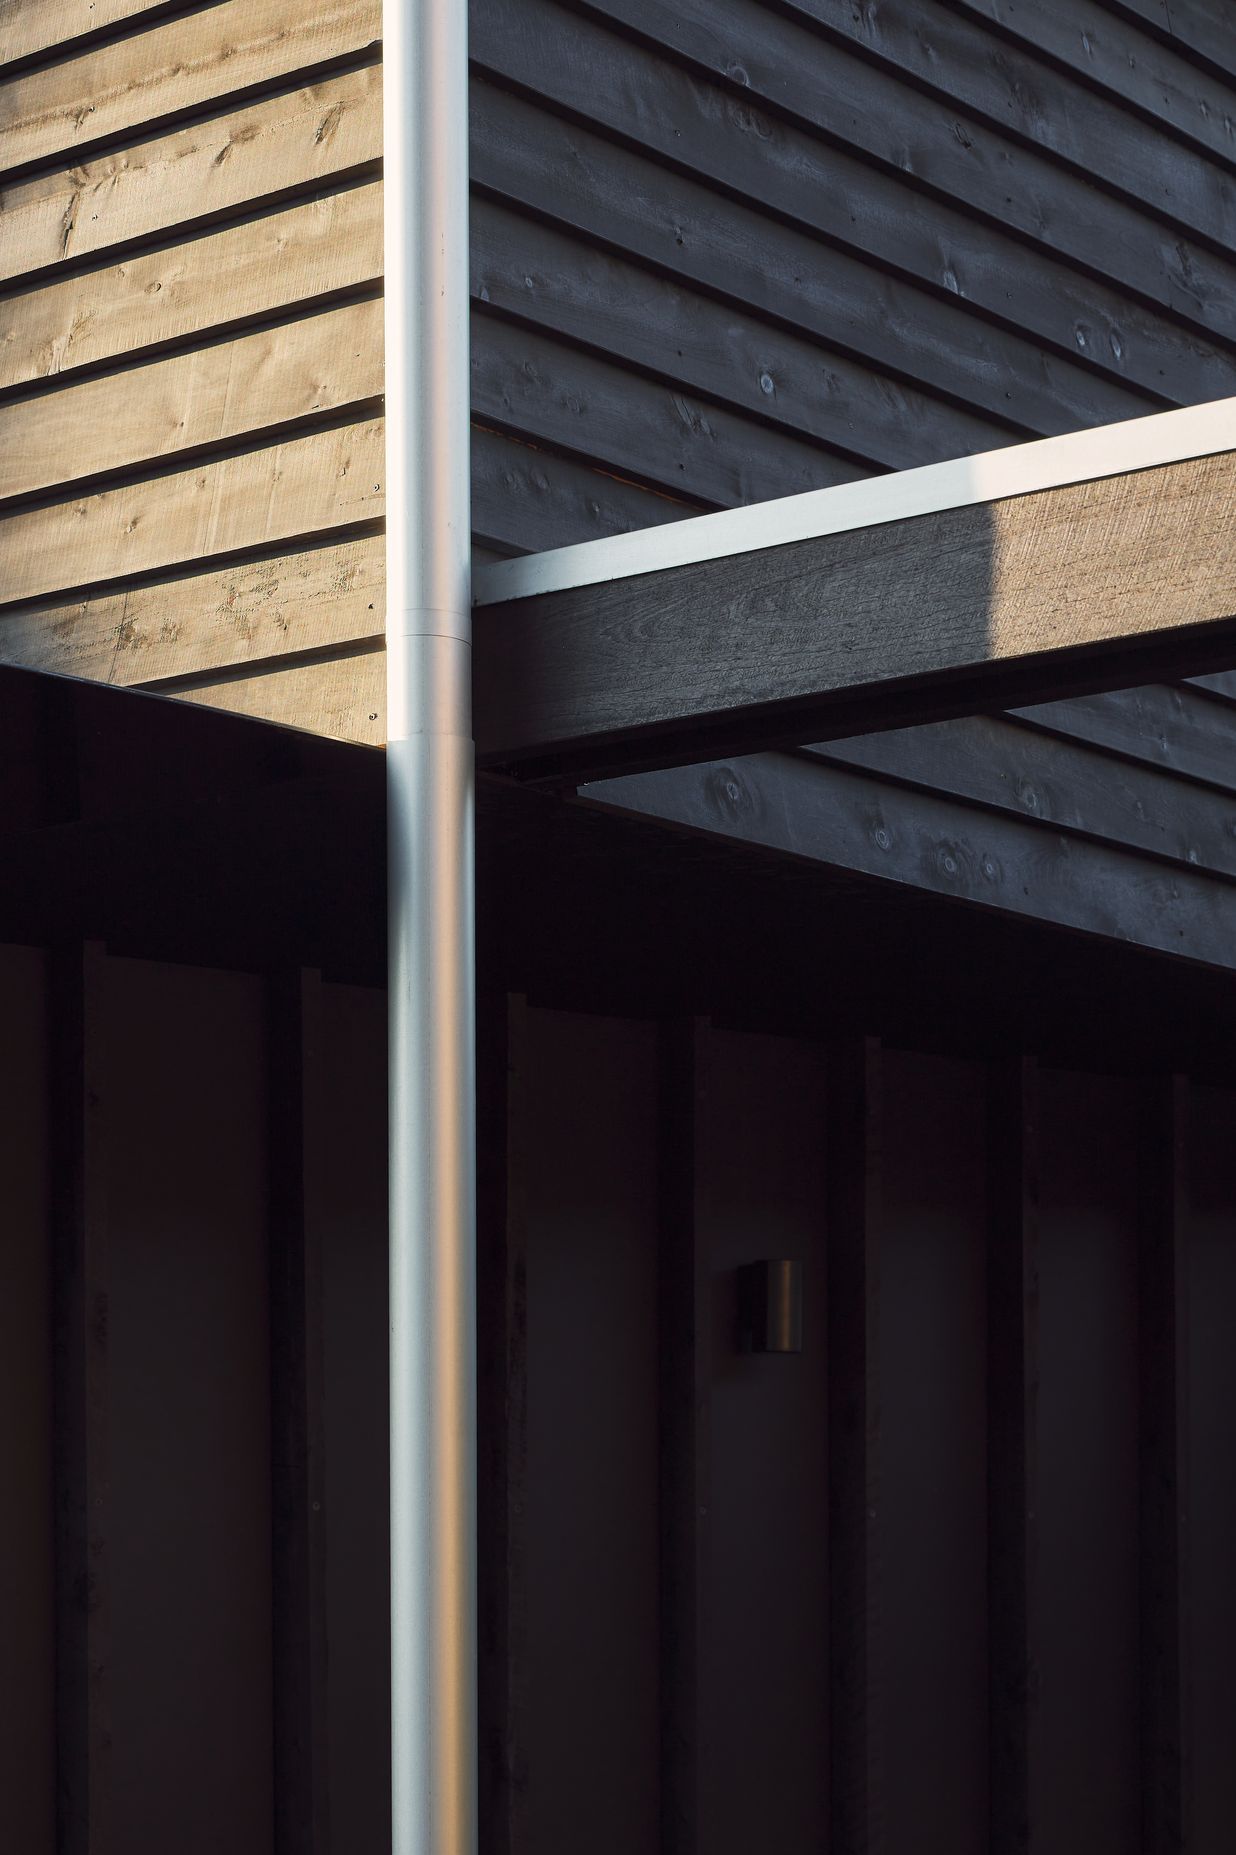 Black stained timber cladding and expressed battens create a muted silhouette for this traditional worker’s cottage, subtly revealing its character and texture throughout the day.⁠